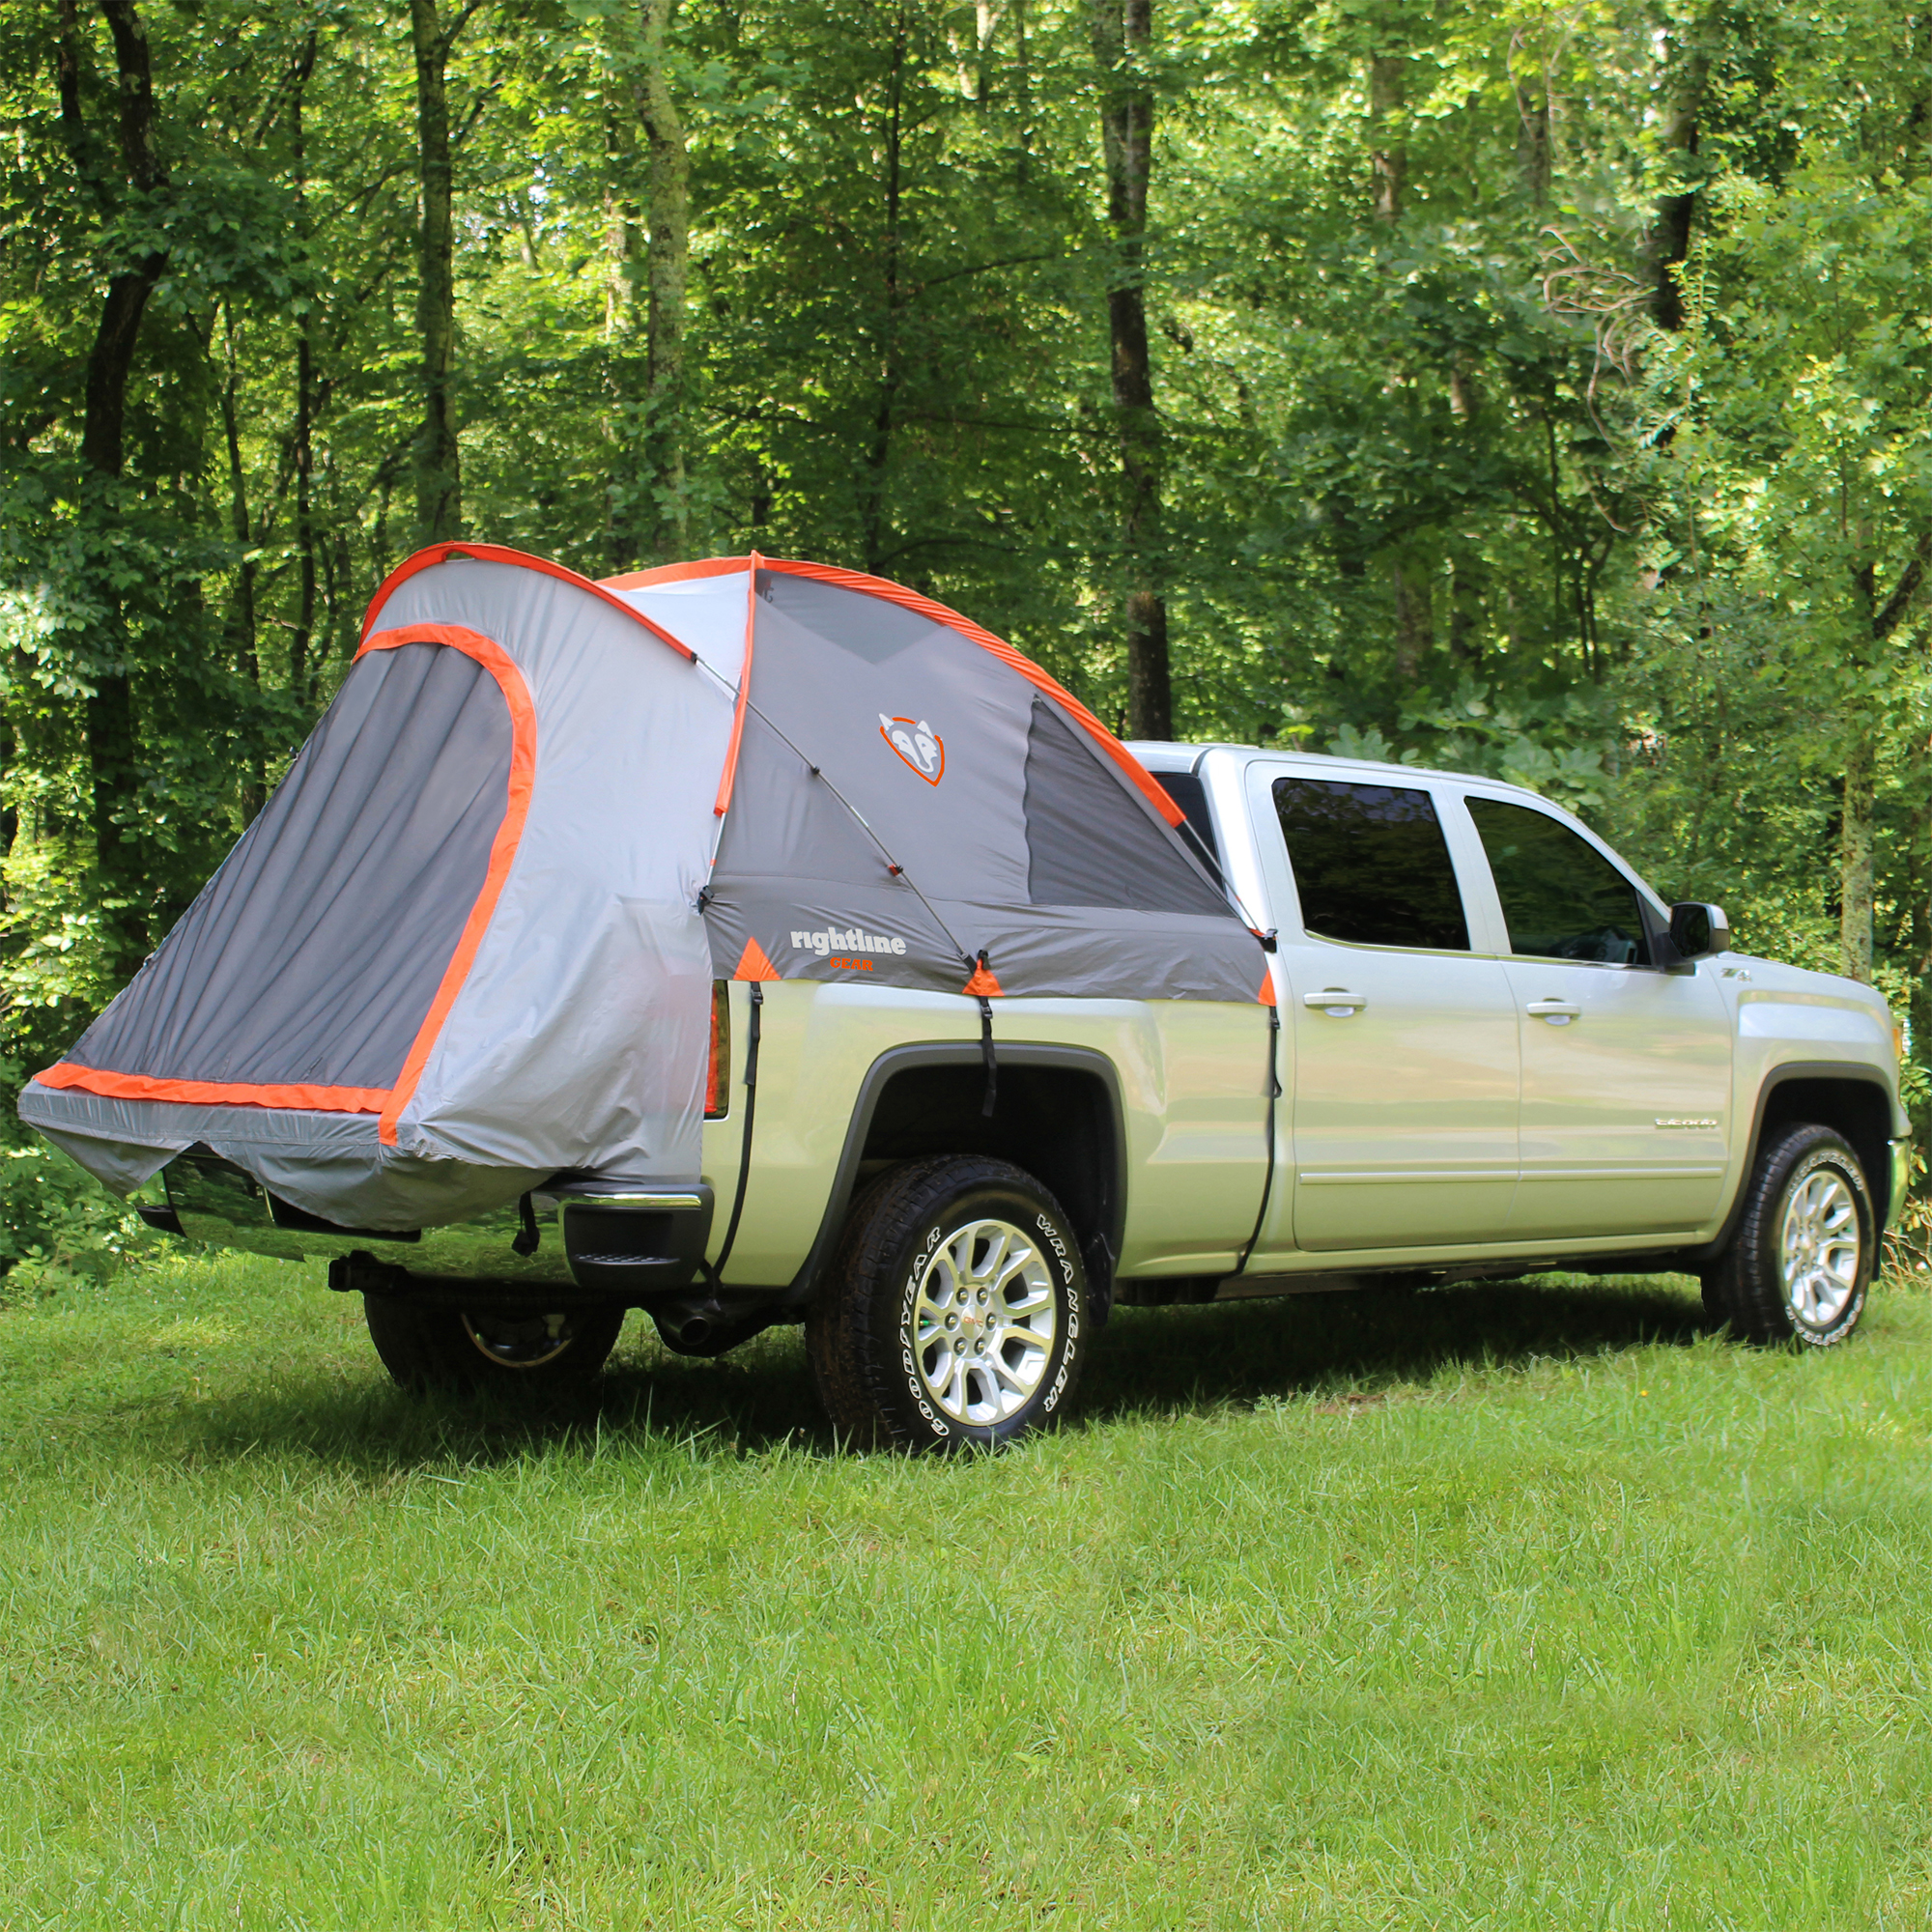 Rightline Gear 8' Full-Size Long-Bed Truck Tent